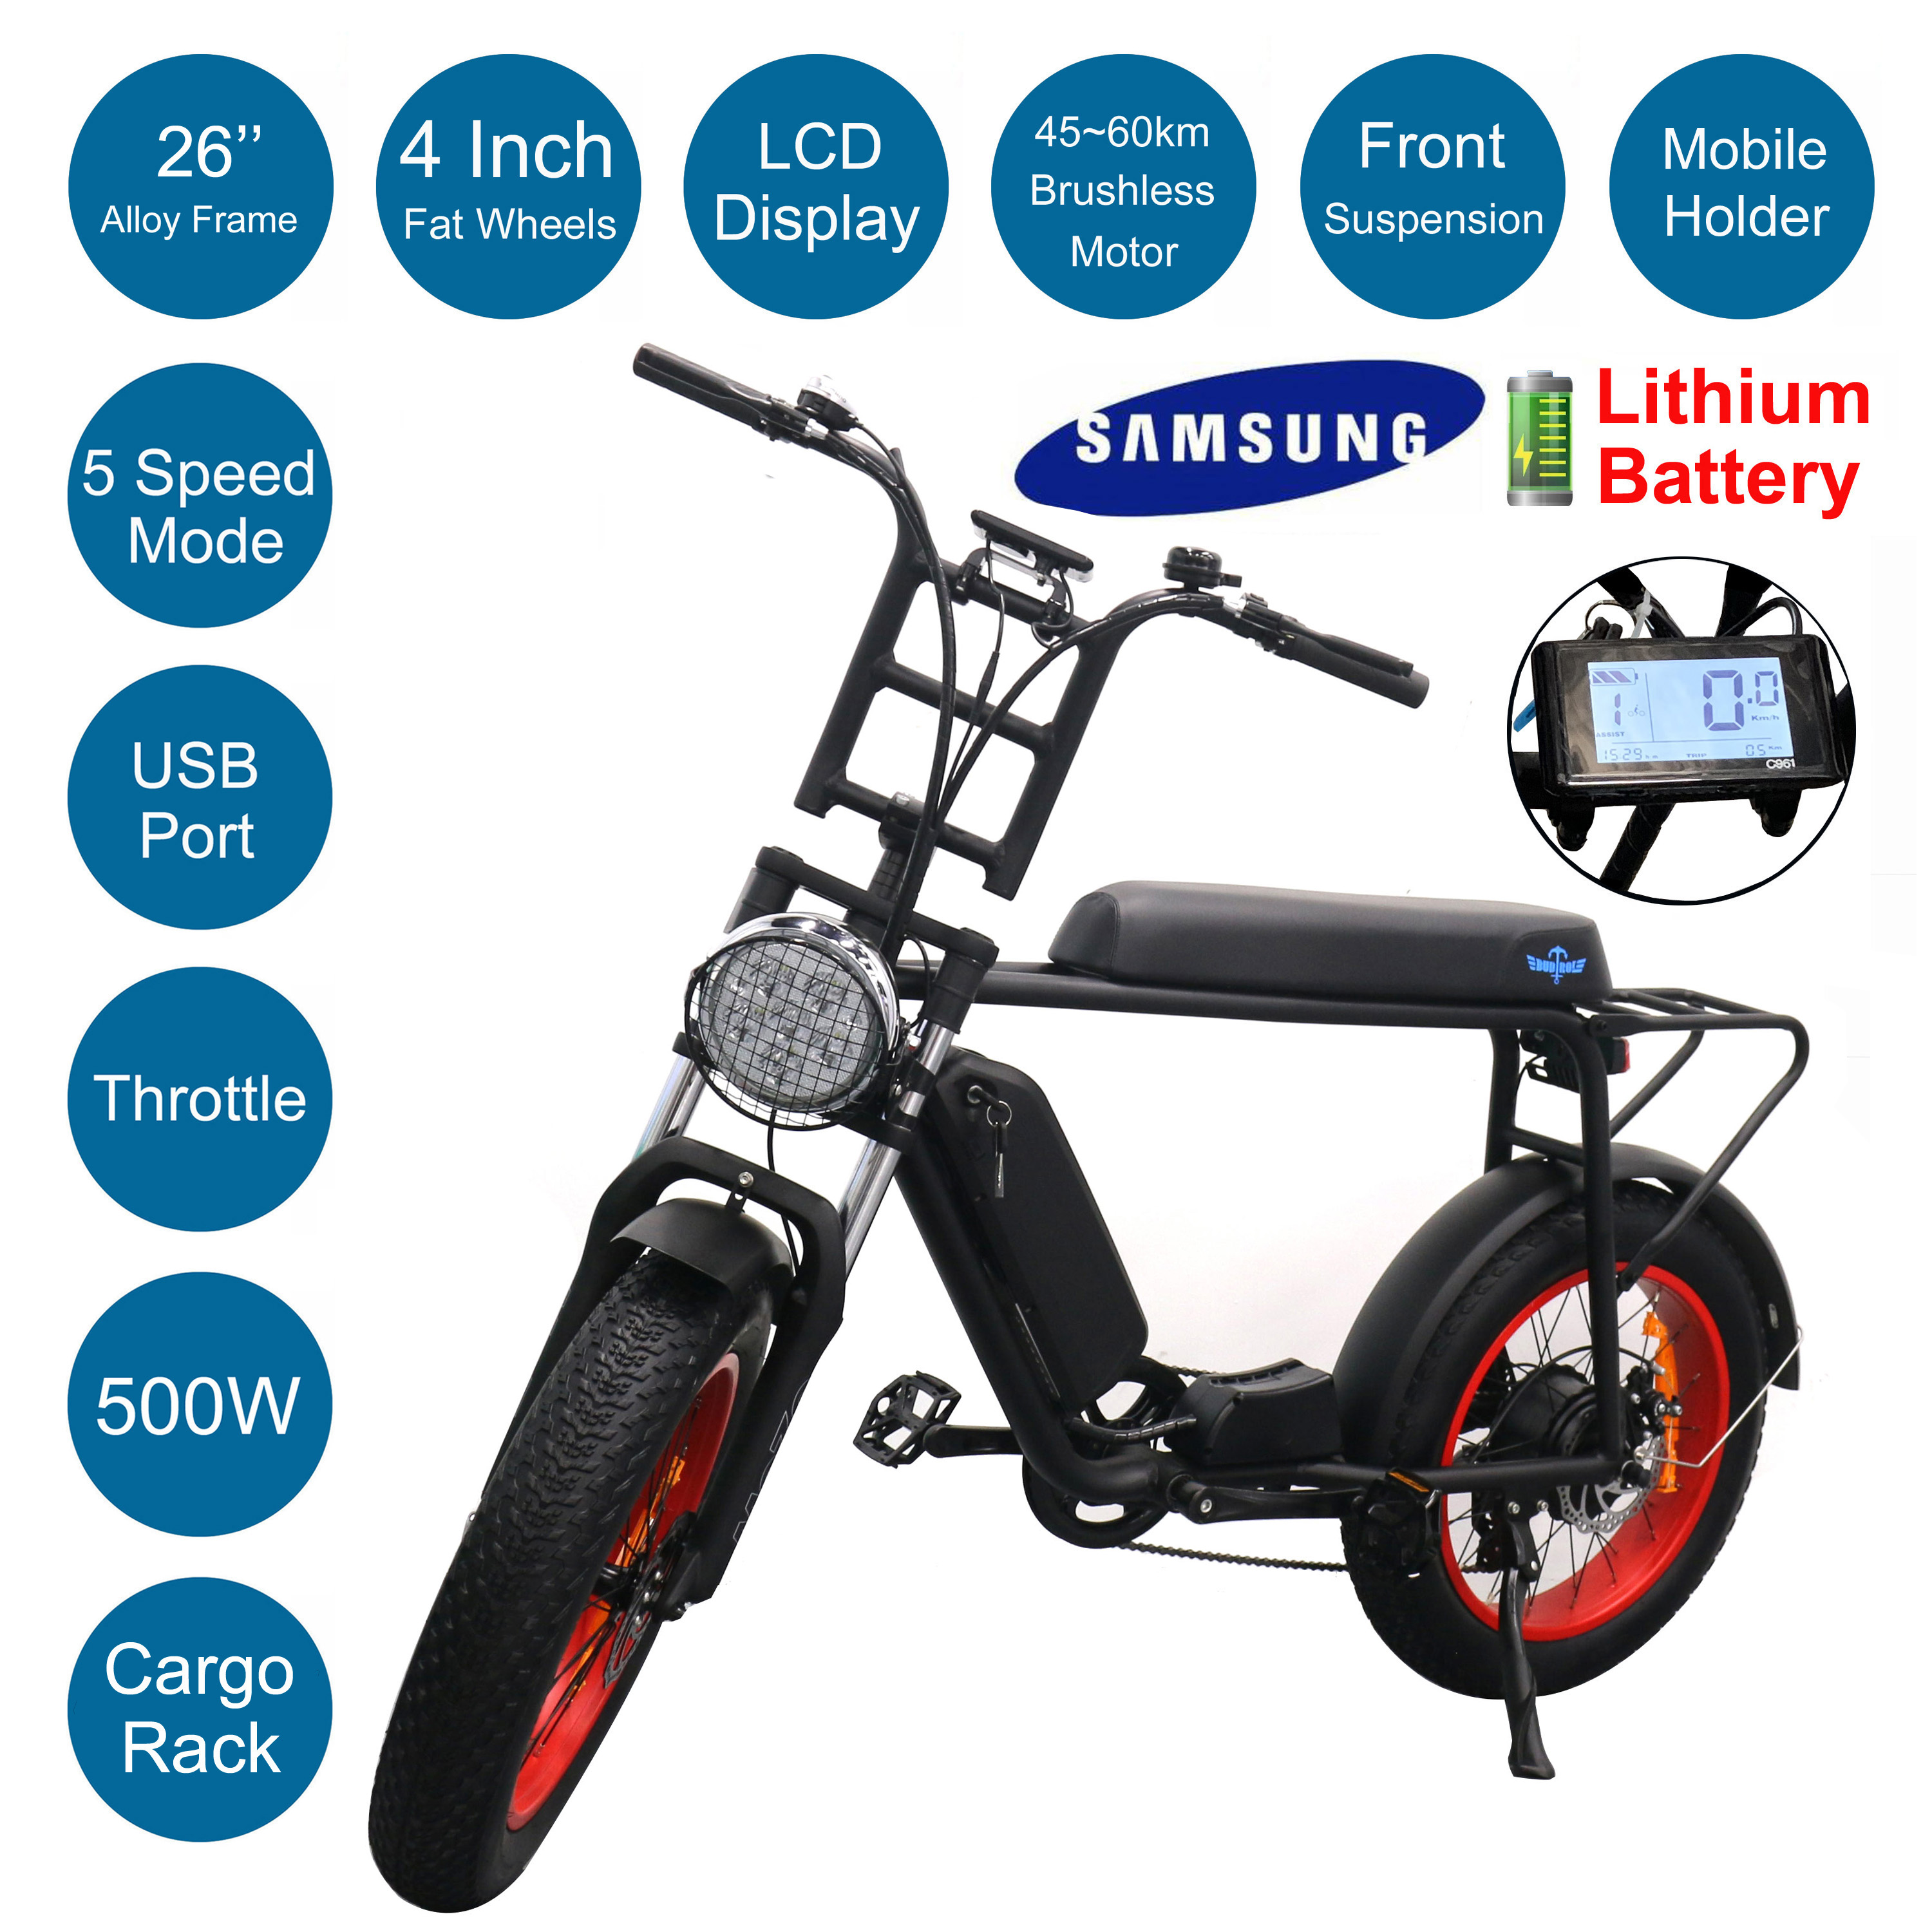 Lightweight and Aluminum Electric Bicycle Reach 18.6 mph 264 lbs Max Load OUTAD Folding E-Bike with 36V 6AH Lithium-Ion Battery 12 inch Wheels and 250W Hub Motor 